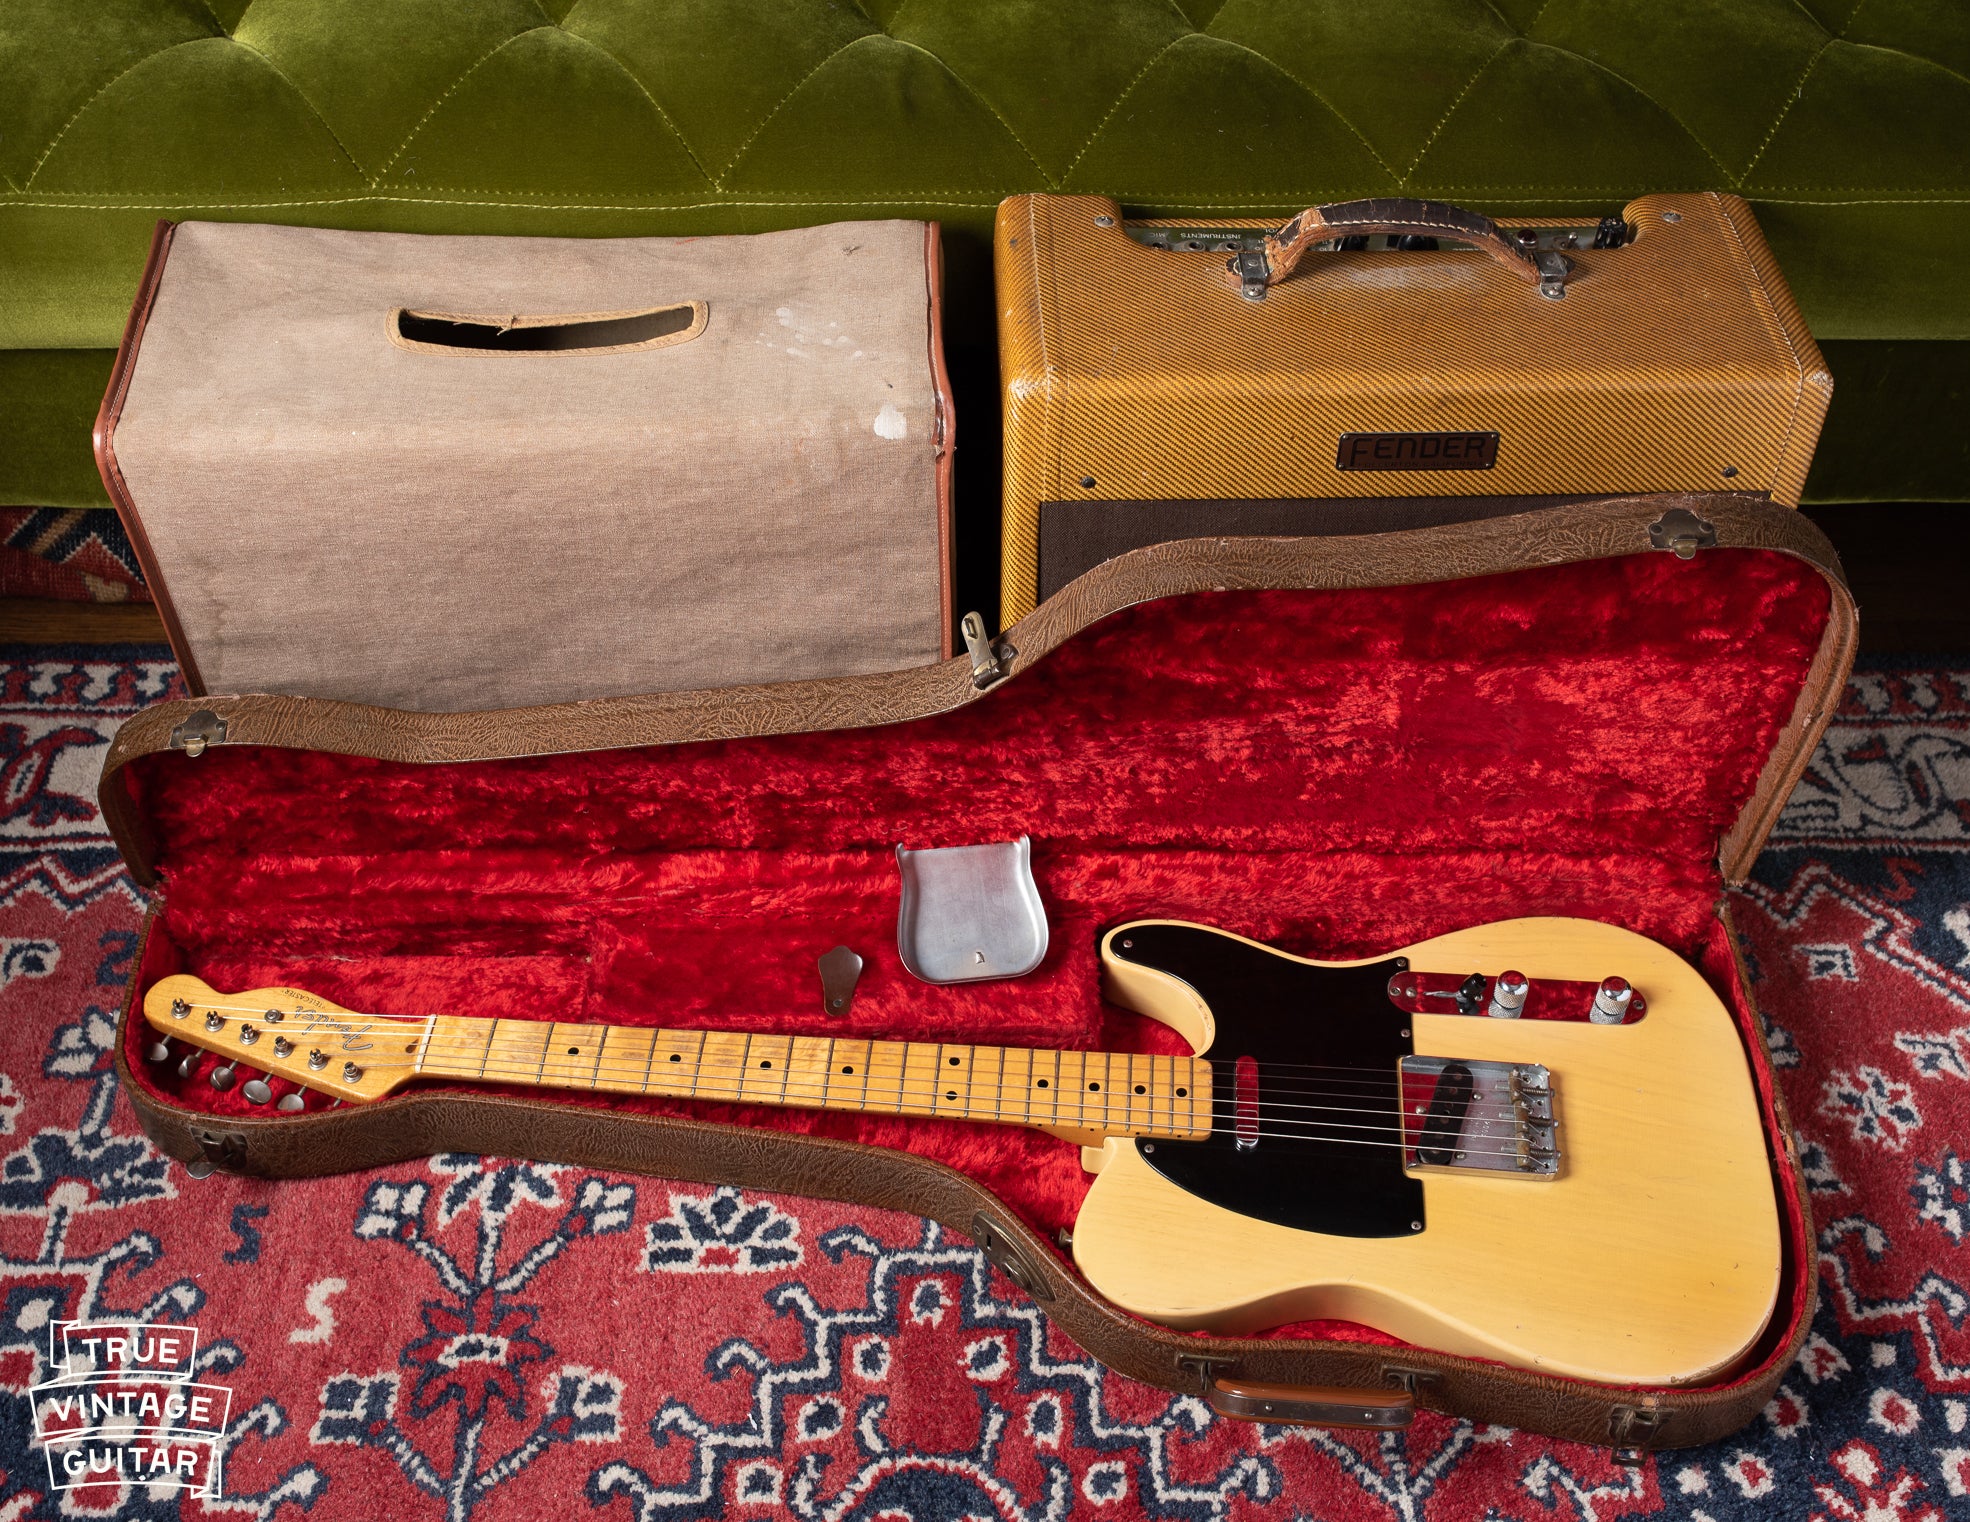 1953 Fender Telecaster with black pickguard, brown form fit case, and Deluxe amp with tweed covering